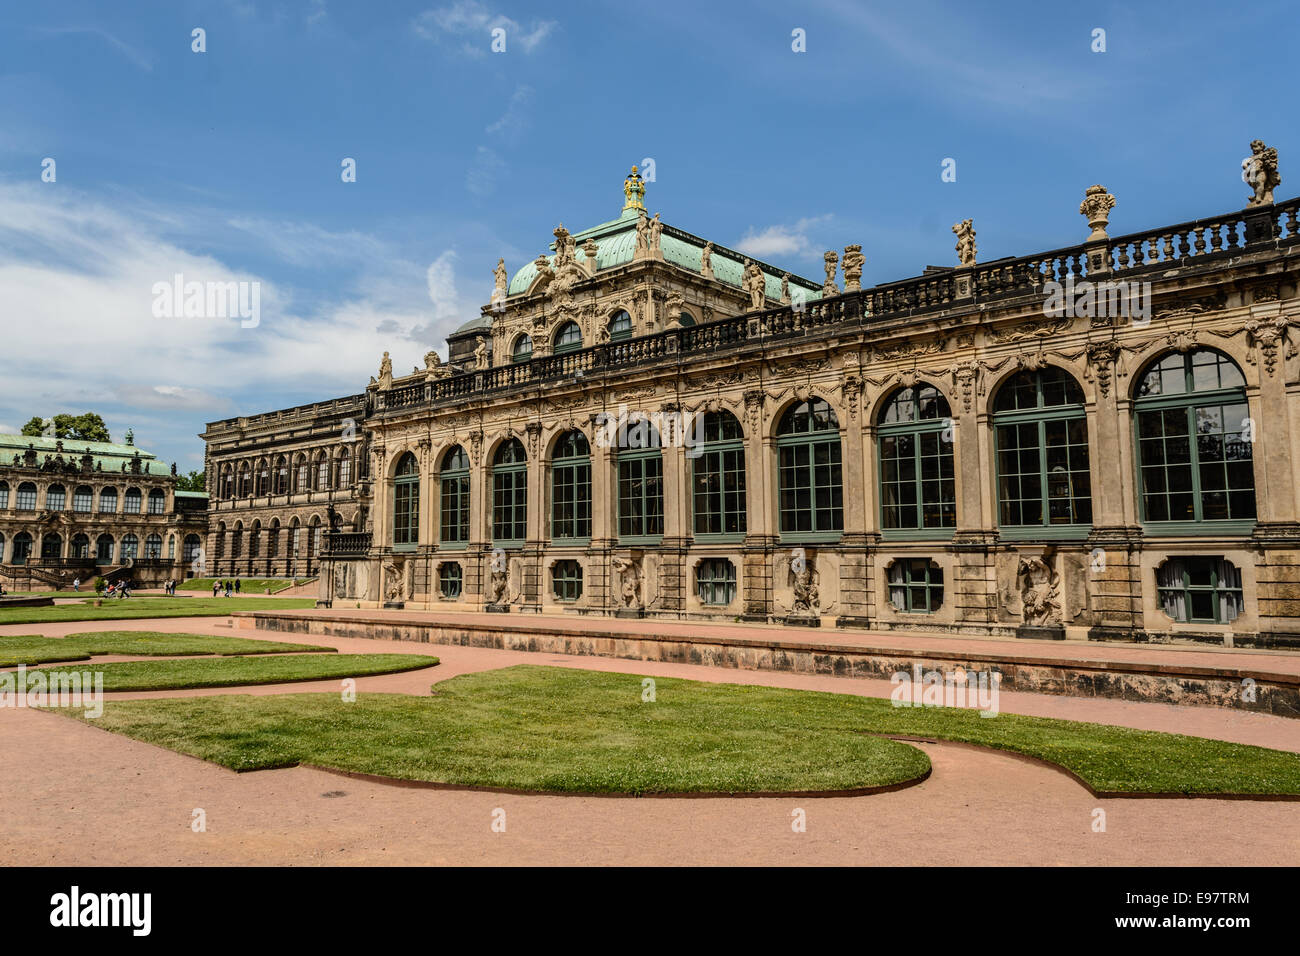 The Zwinger palace in Dresden Stock Photo